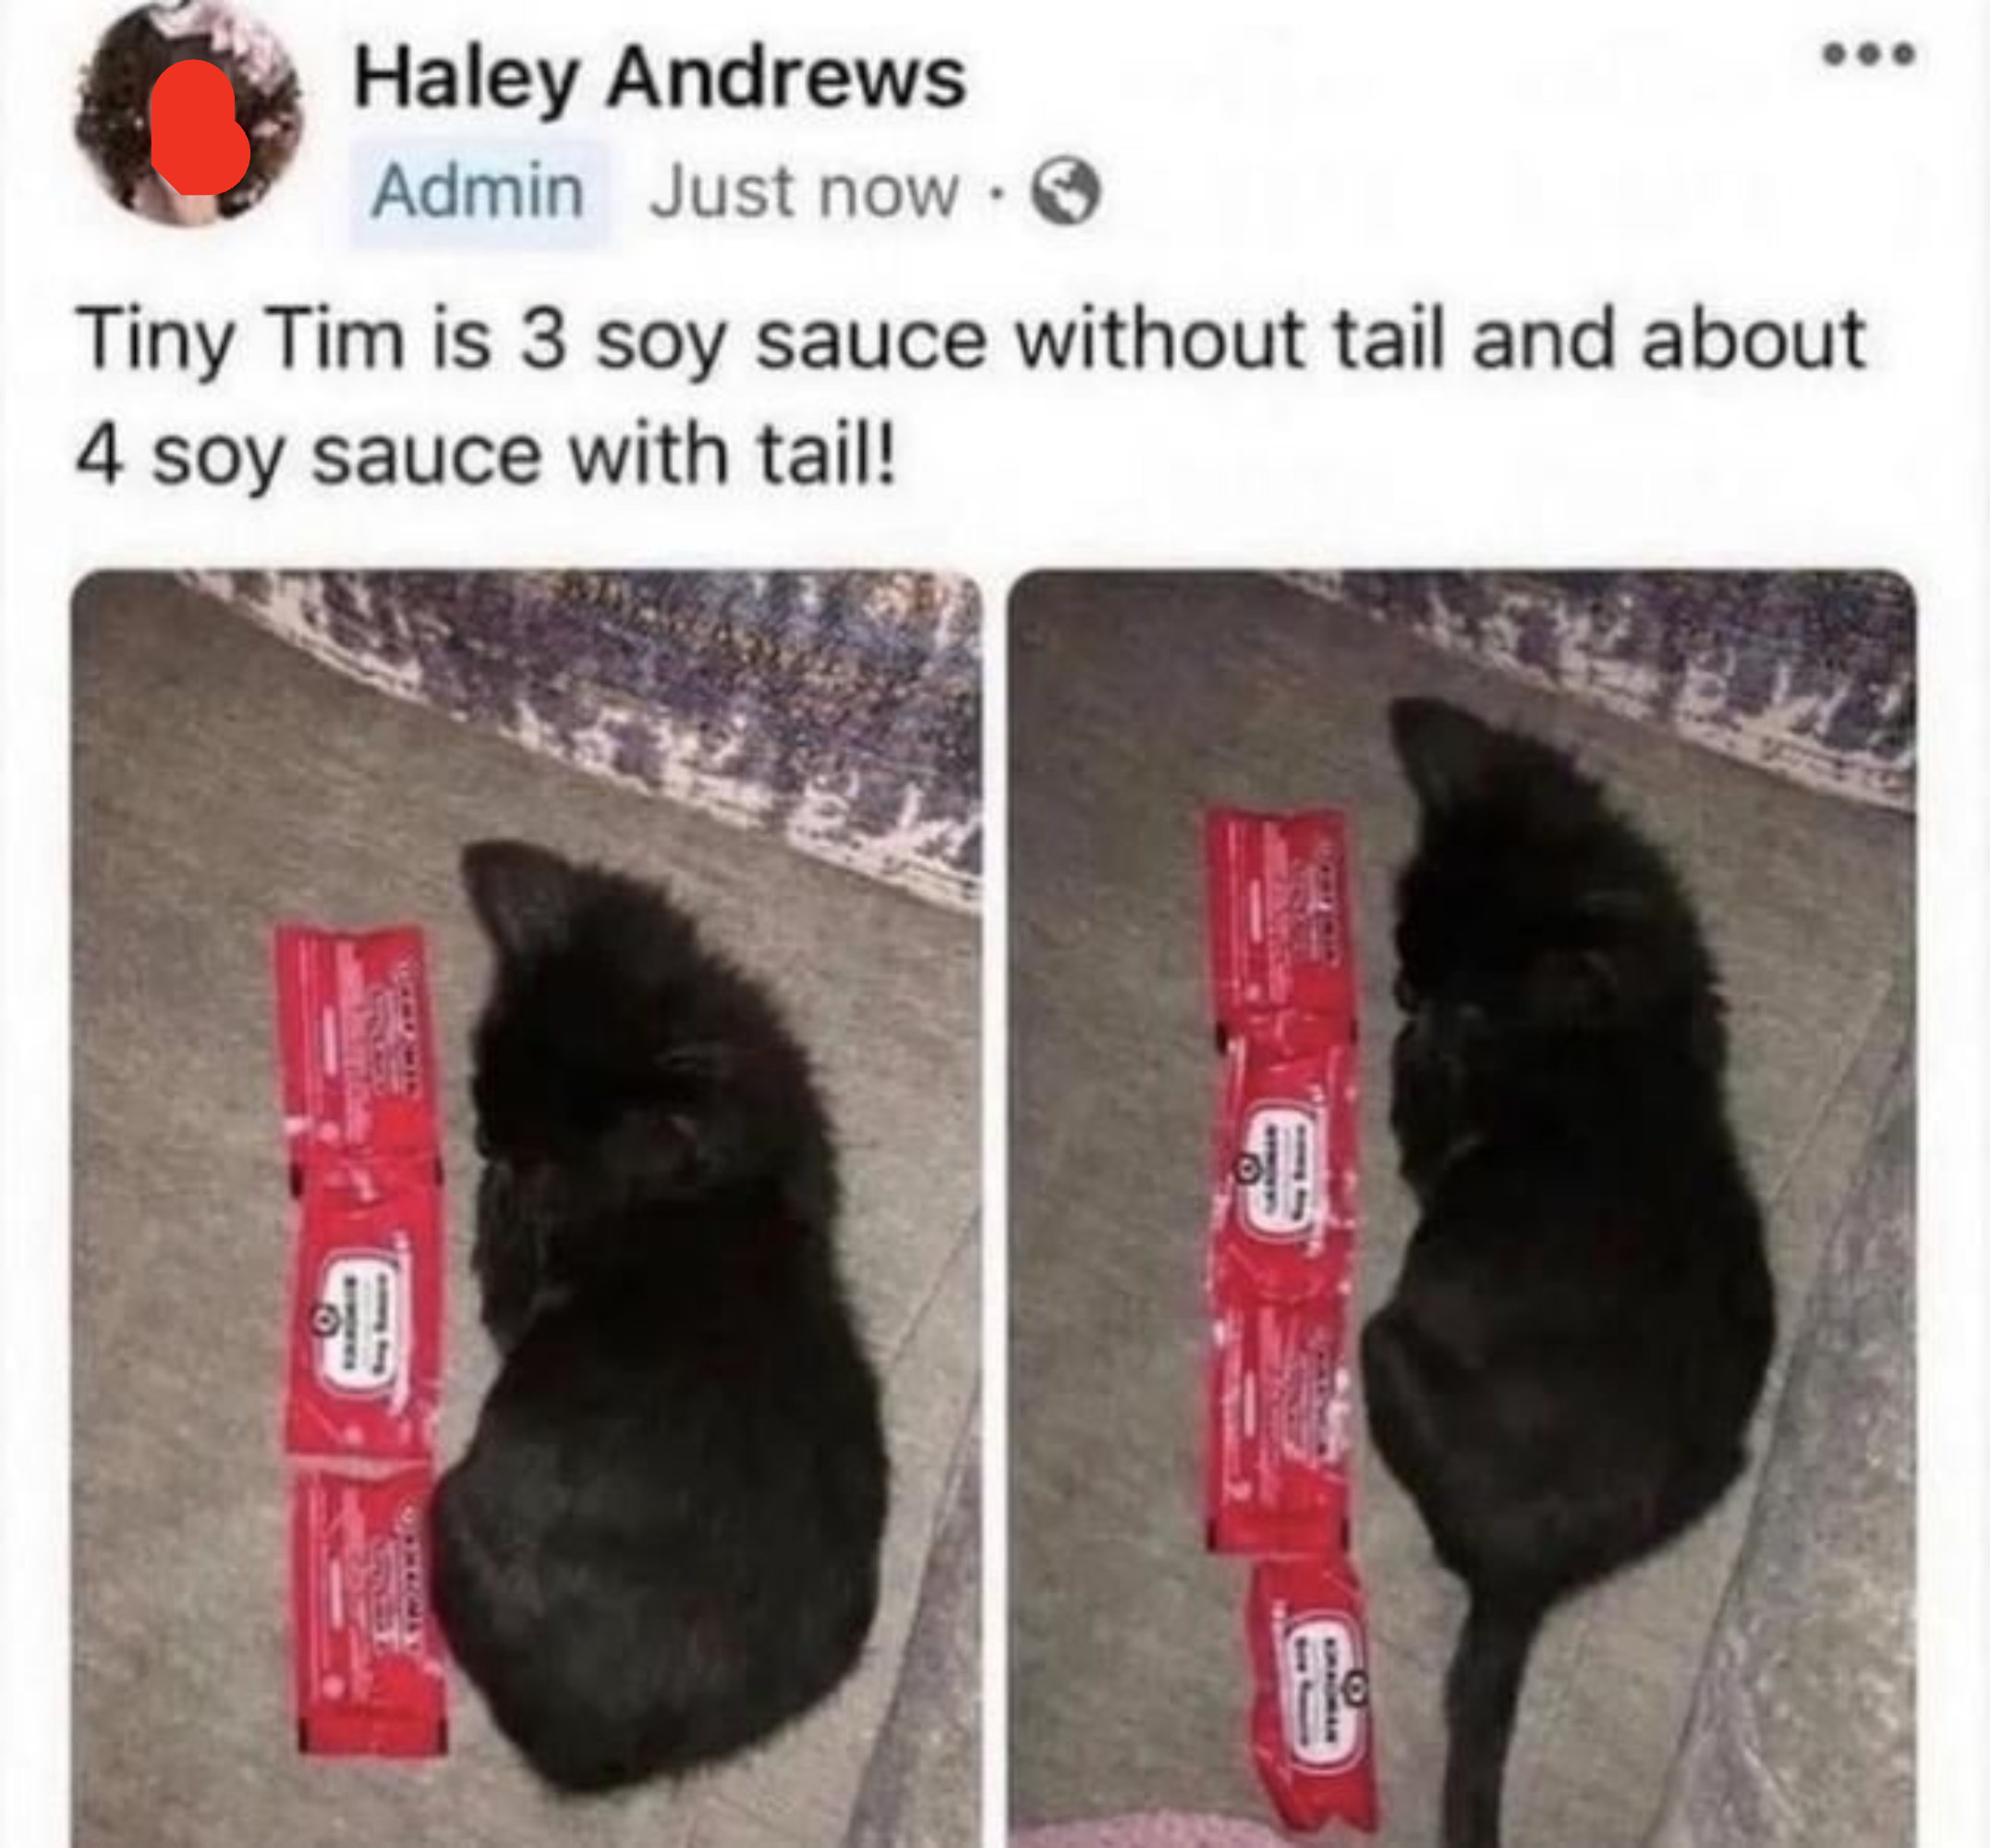 Cat named Tiny Tim is measured against takeout soy sauce packets: three without a tail, and four packs with the tail